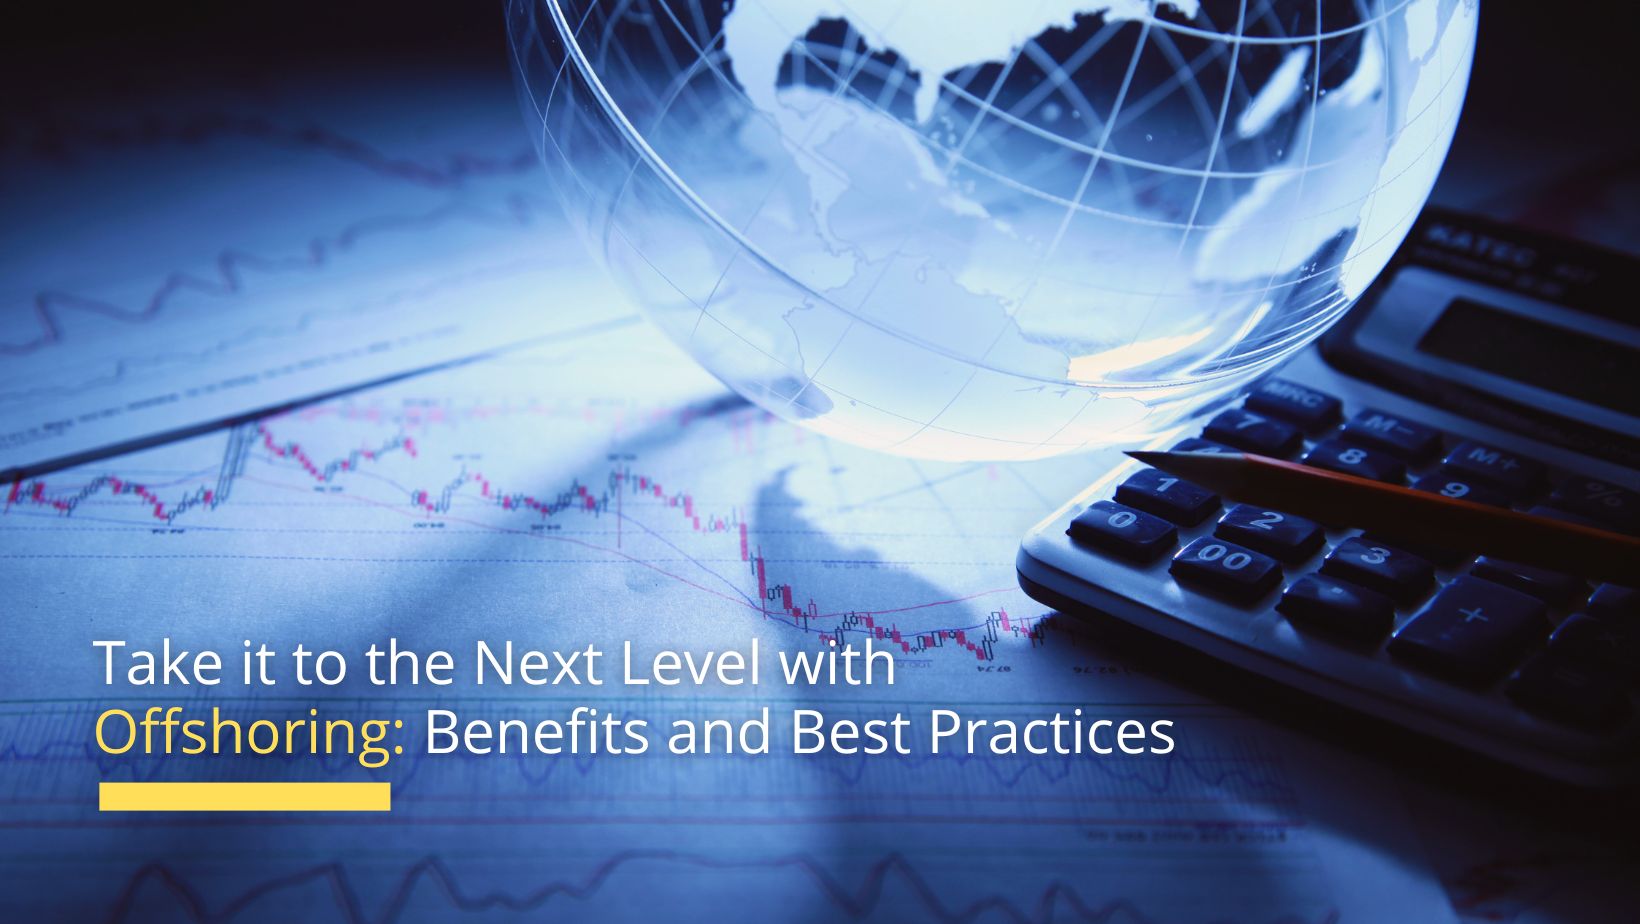 Take it to the Next Level with Offshoring and Best Practices